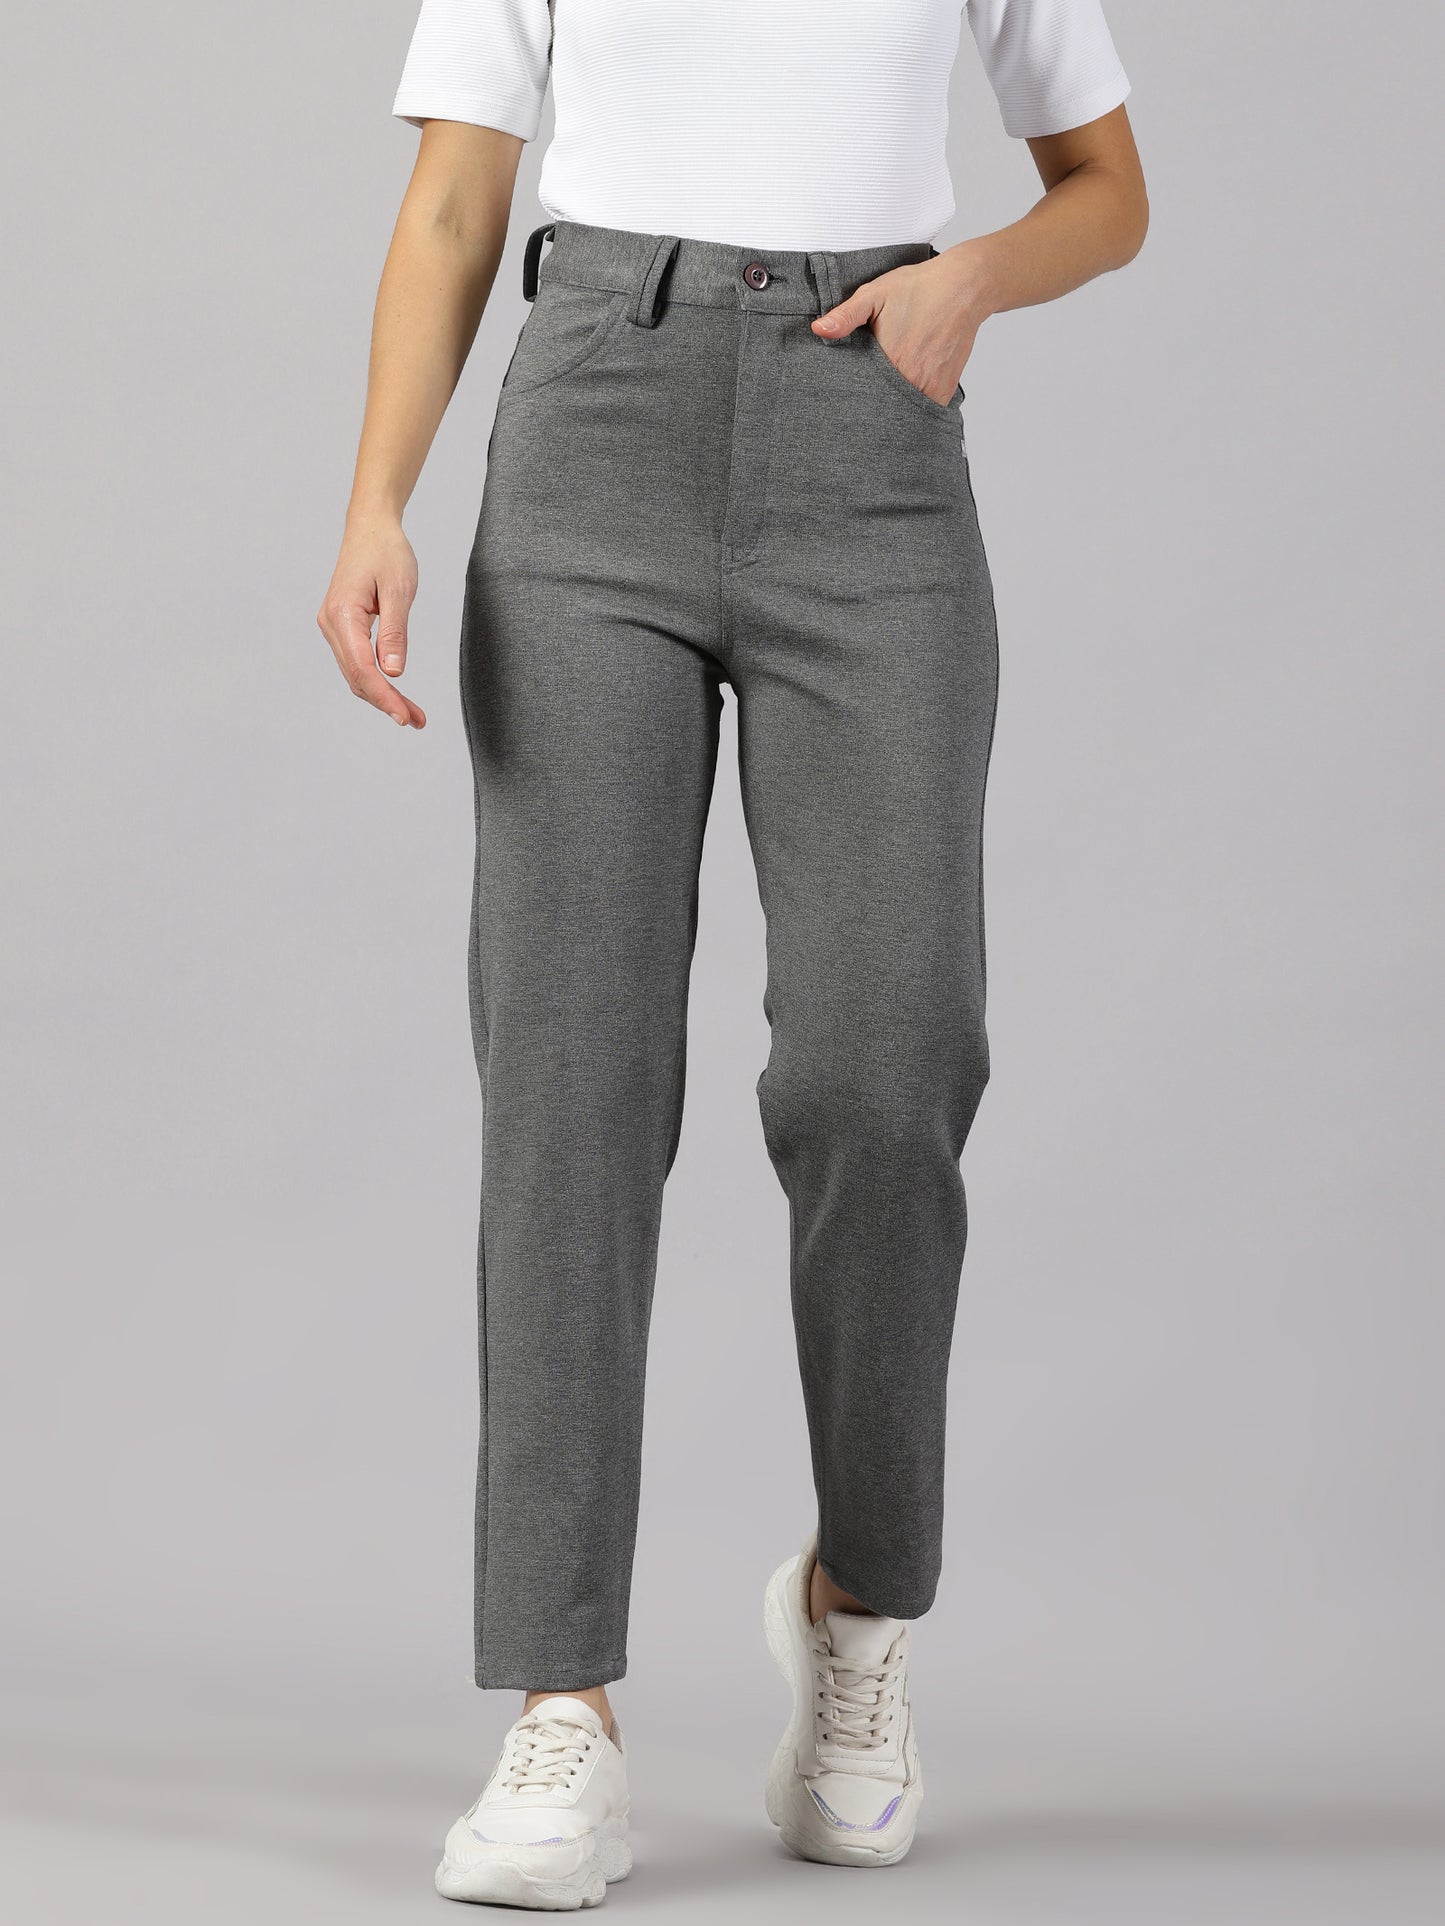 Textured grey solid four pocket stretchable trousers